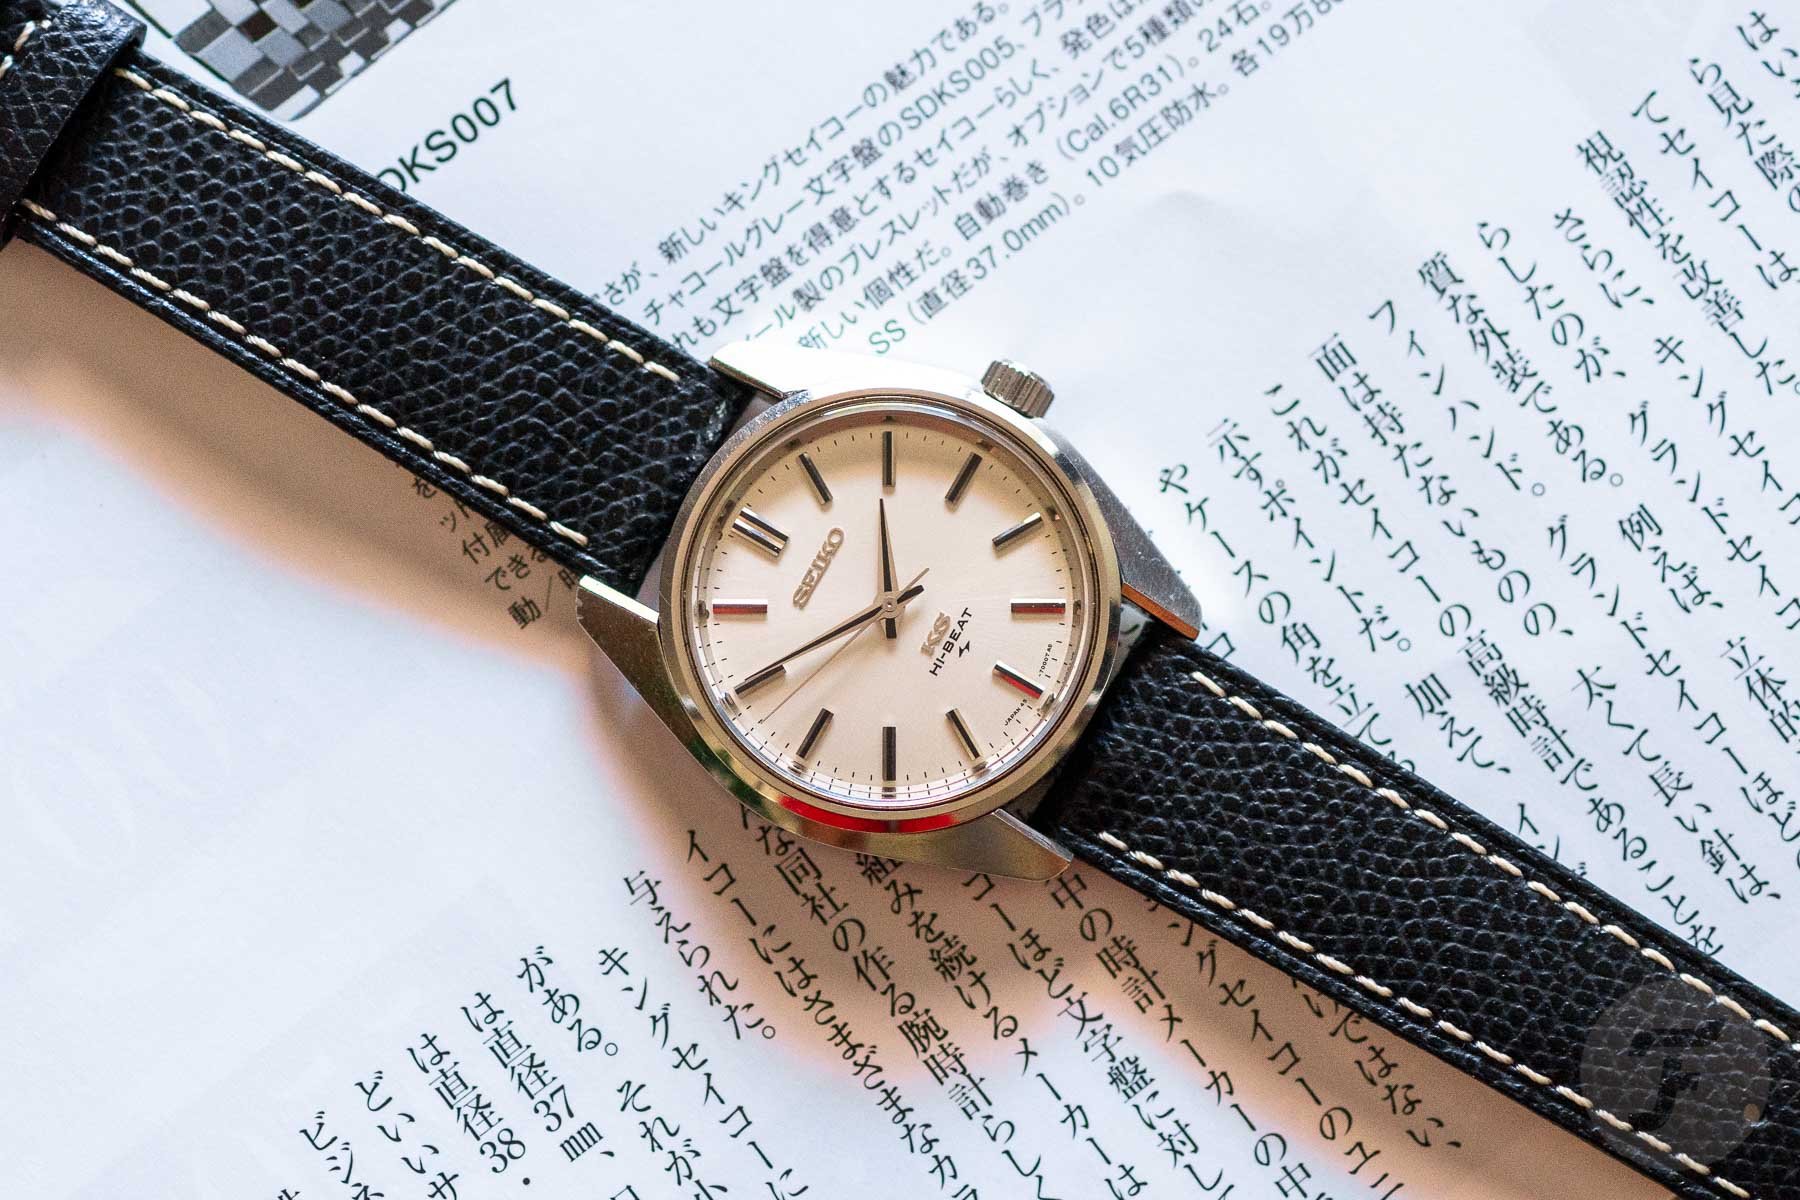 The Lapinist Launches Sapphire Crystals For Vintage Grand Seiko And King Seiko Models